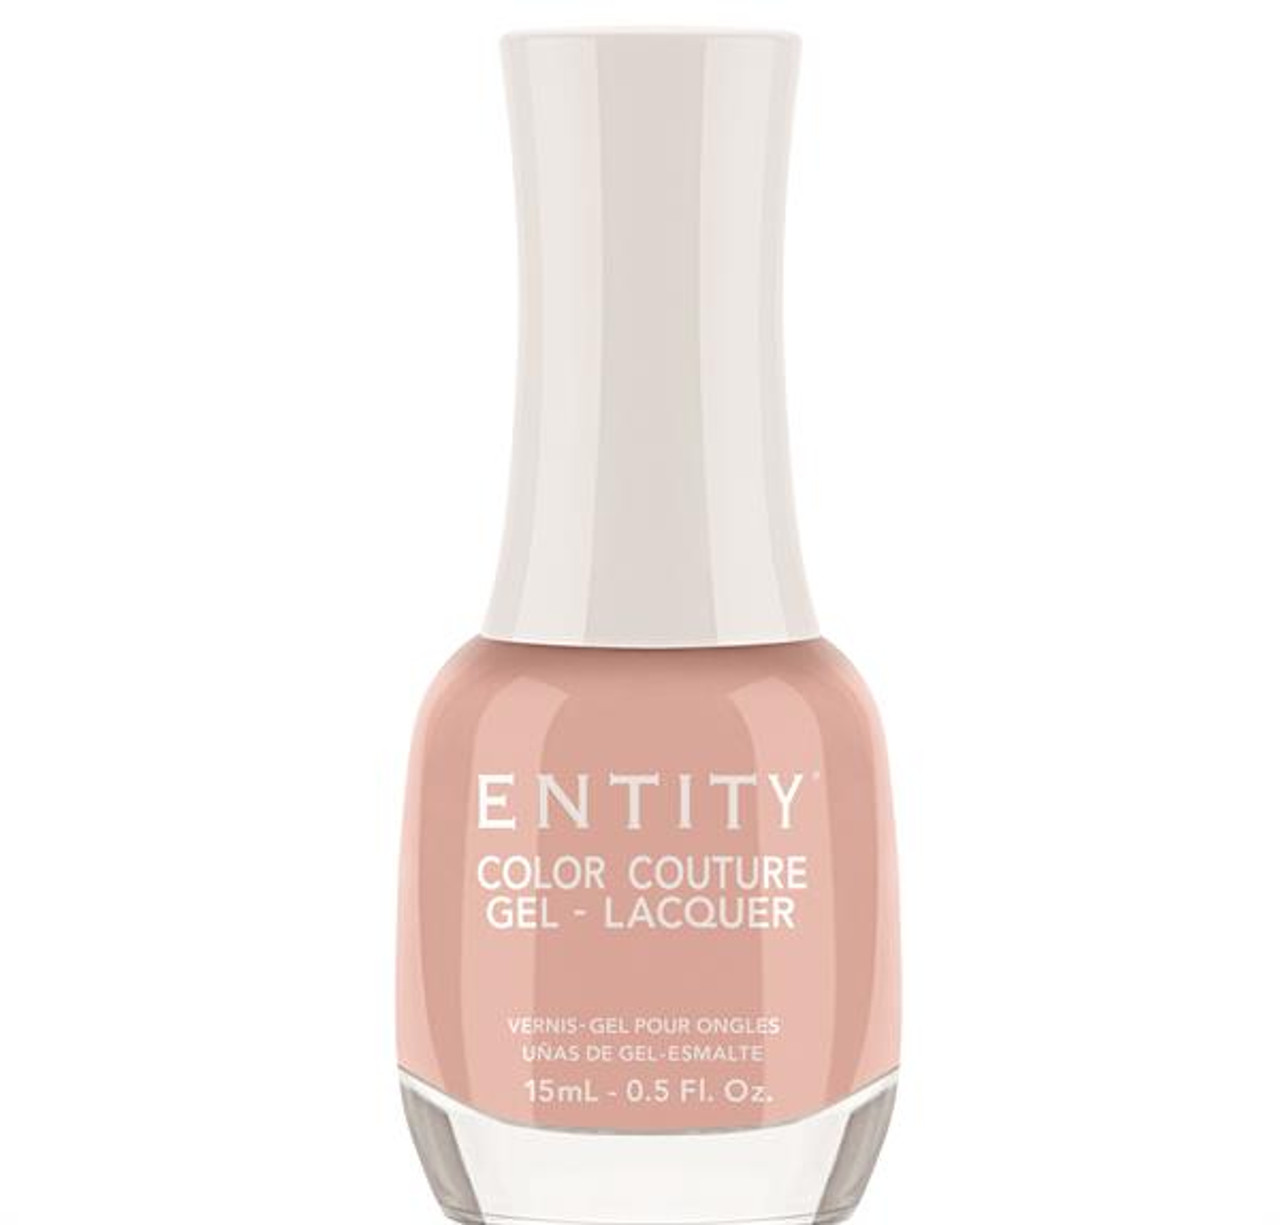 Entity Color Couture Gel-Lacquer PERFECTLY POLISHED - 15 mL / .5 fl oz